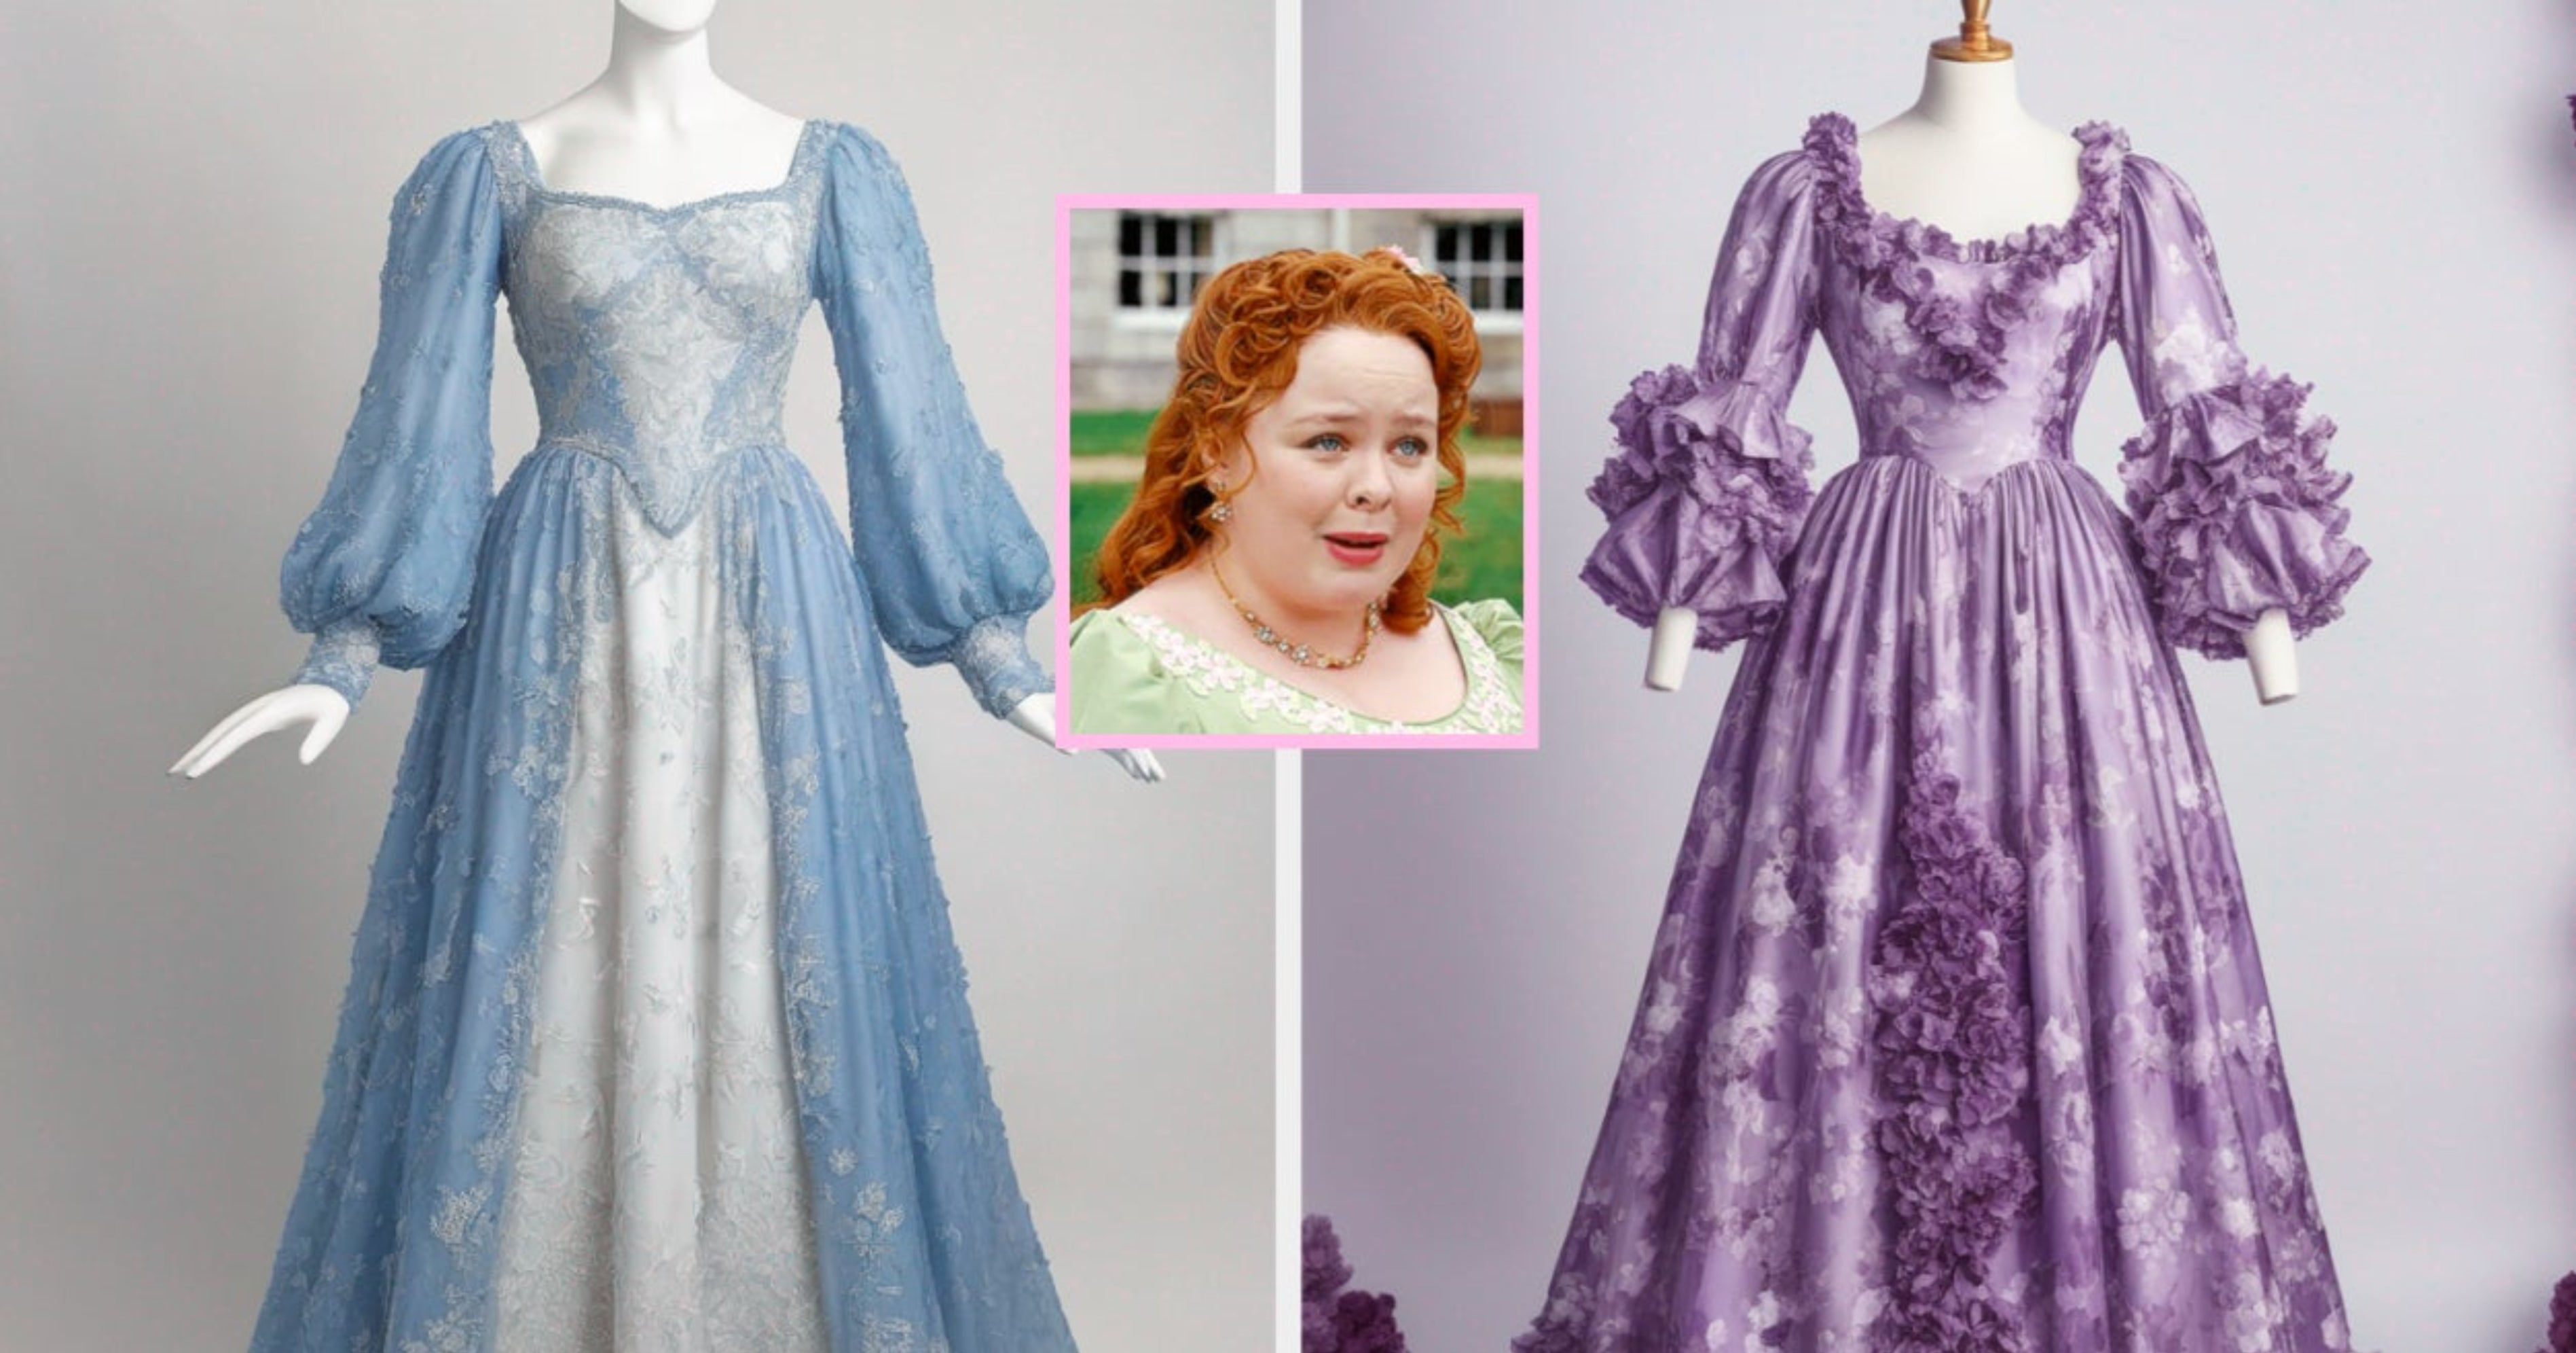 I Made A "Bridgerton" Ball Gown Generator, And The Results Are Shockingly Good, TBH — You Can Design Your Own Too